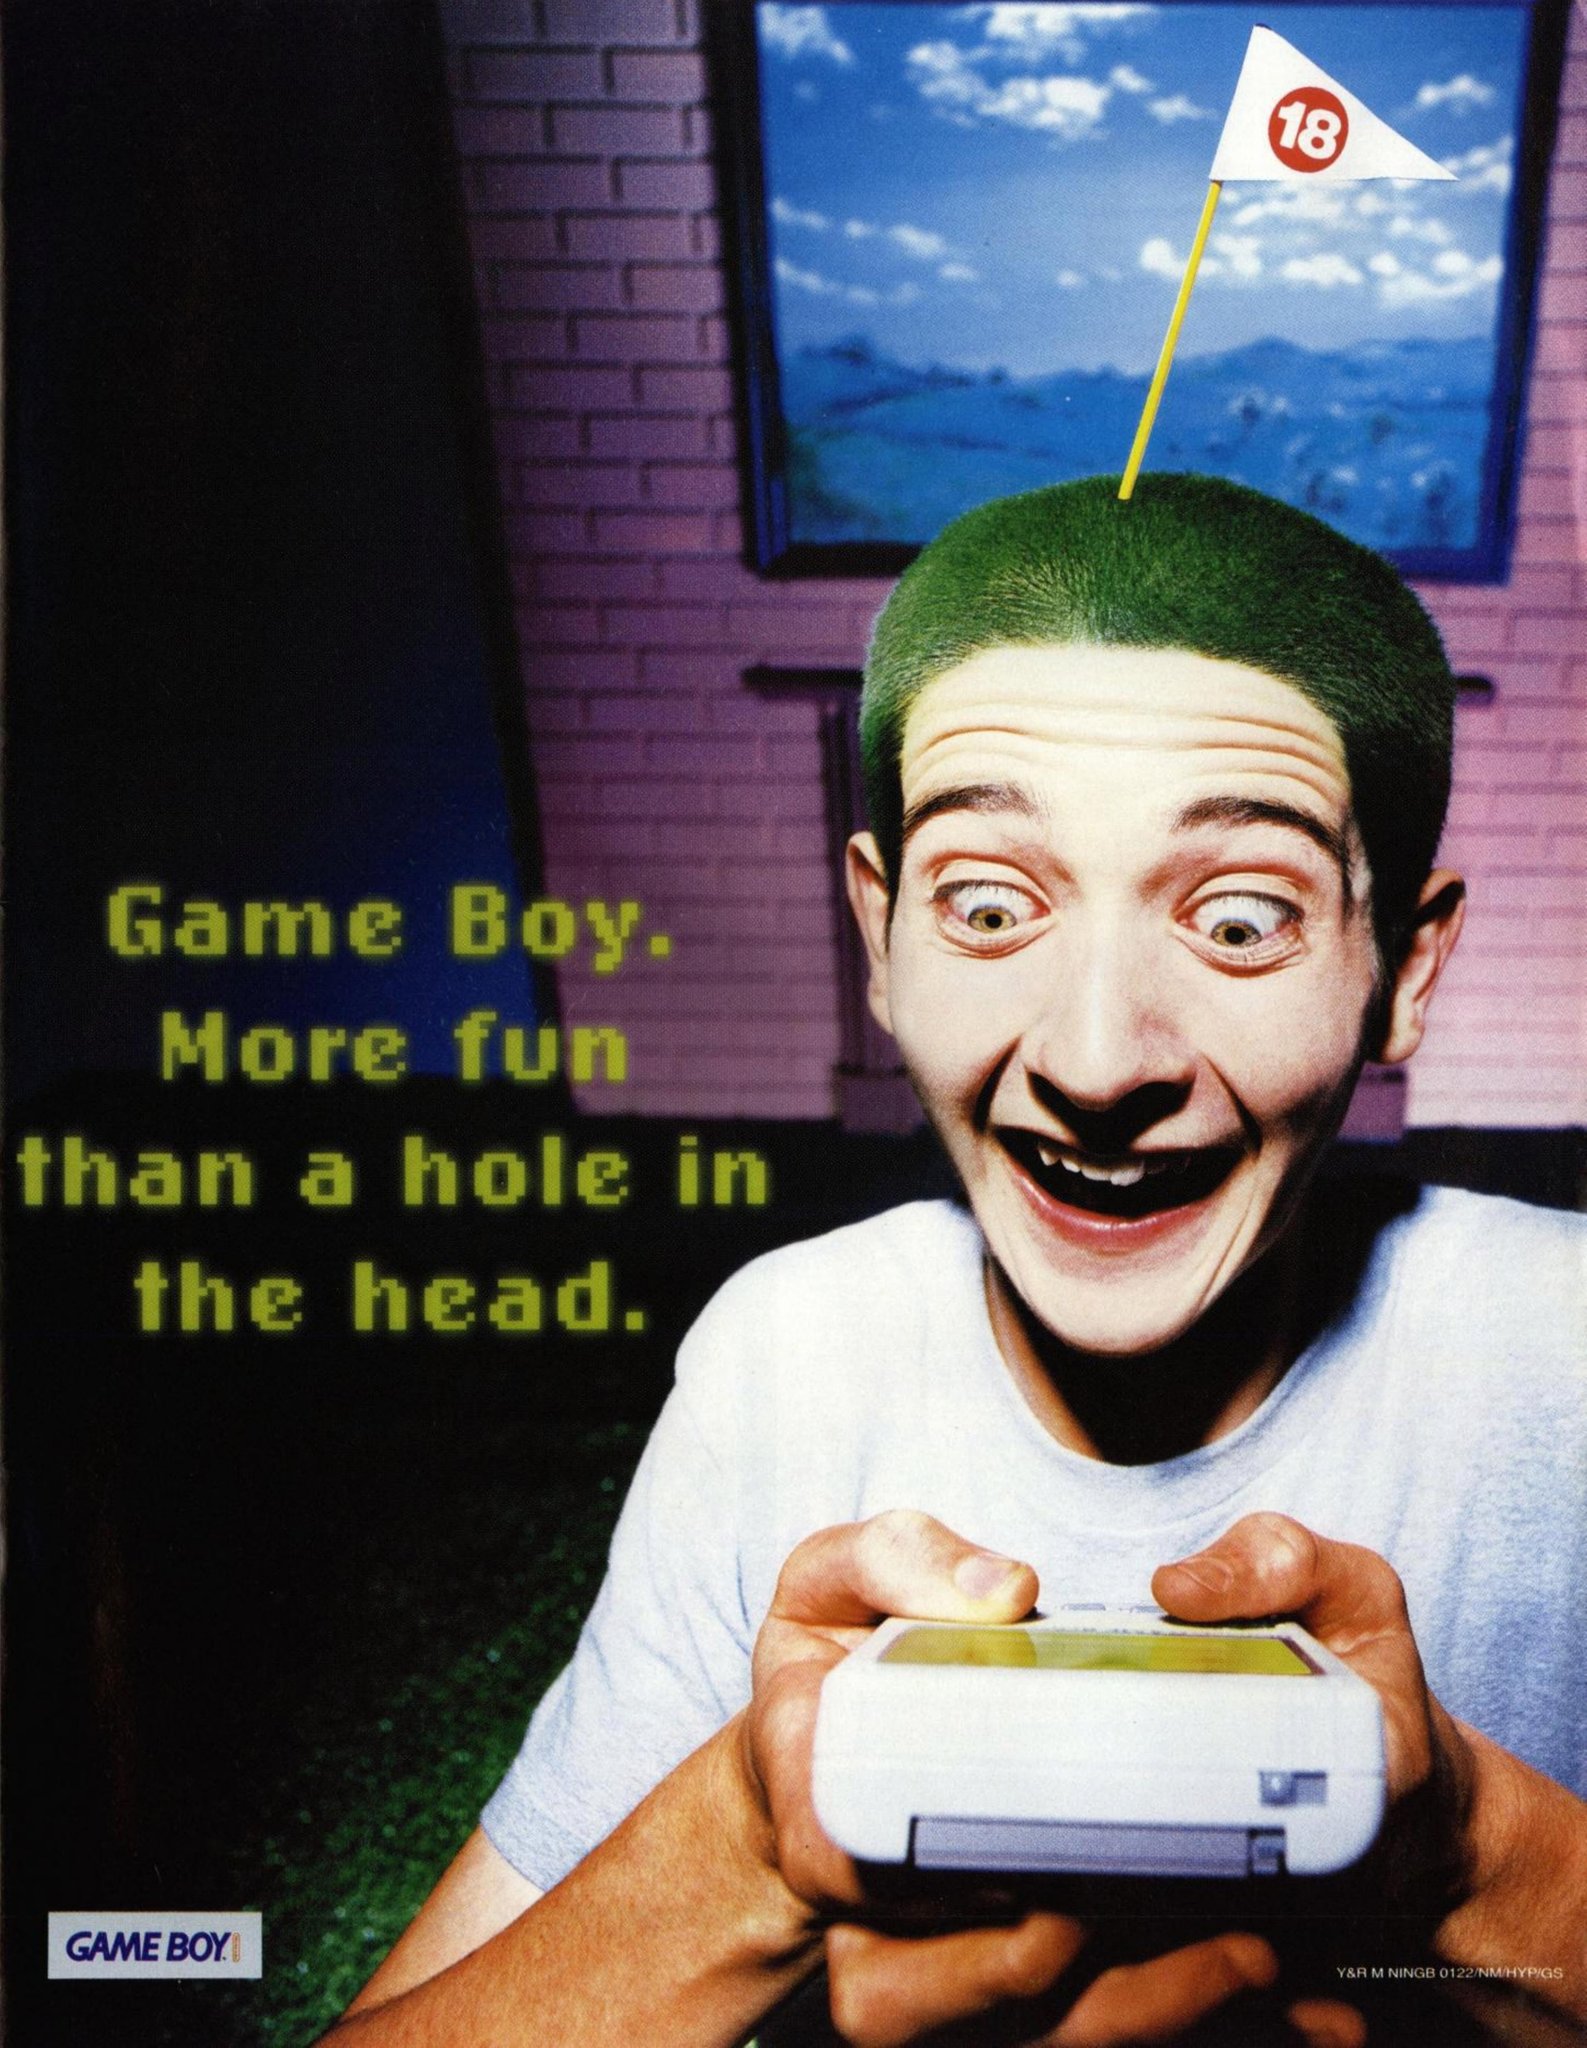 weird ass gaming ads - photo caption - Game Boy. More fun than a hole in the head. Game Boy 18 www